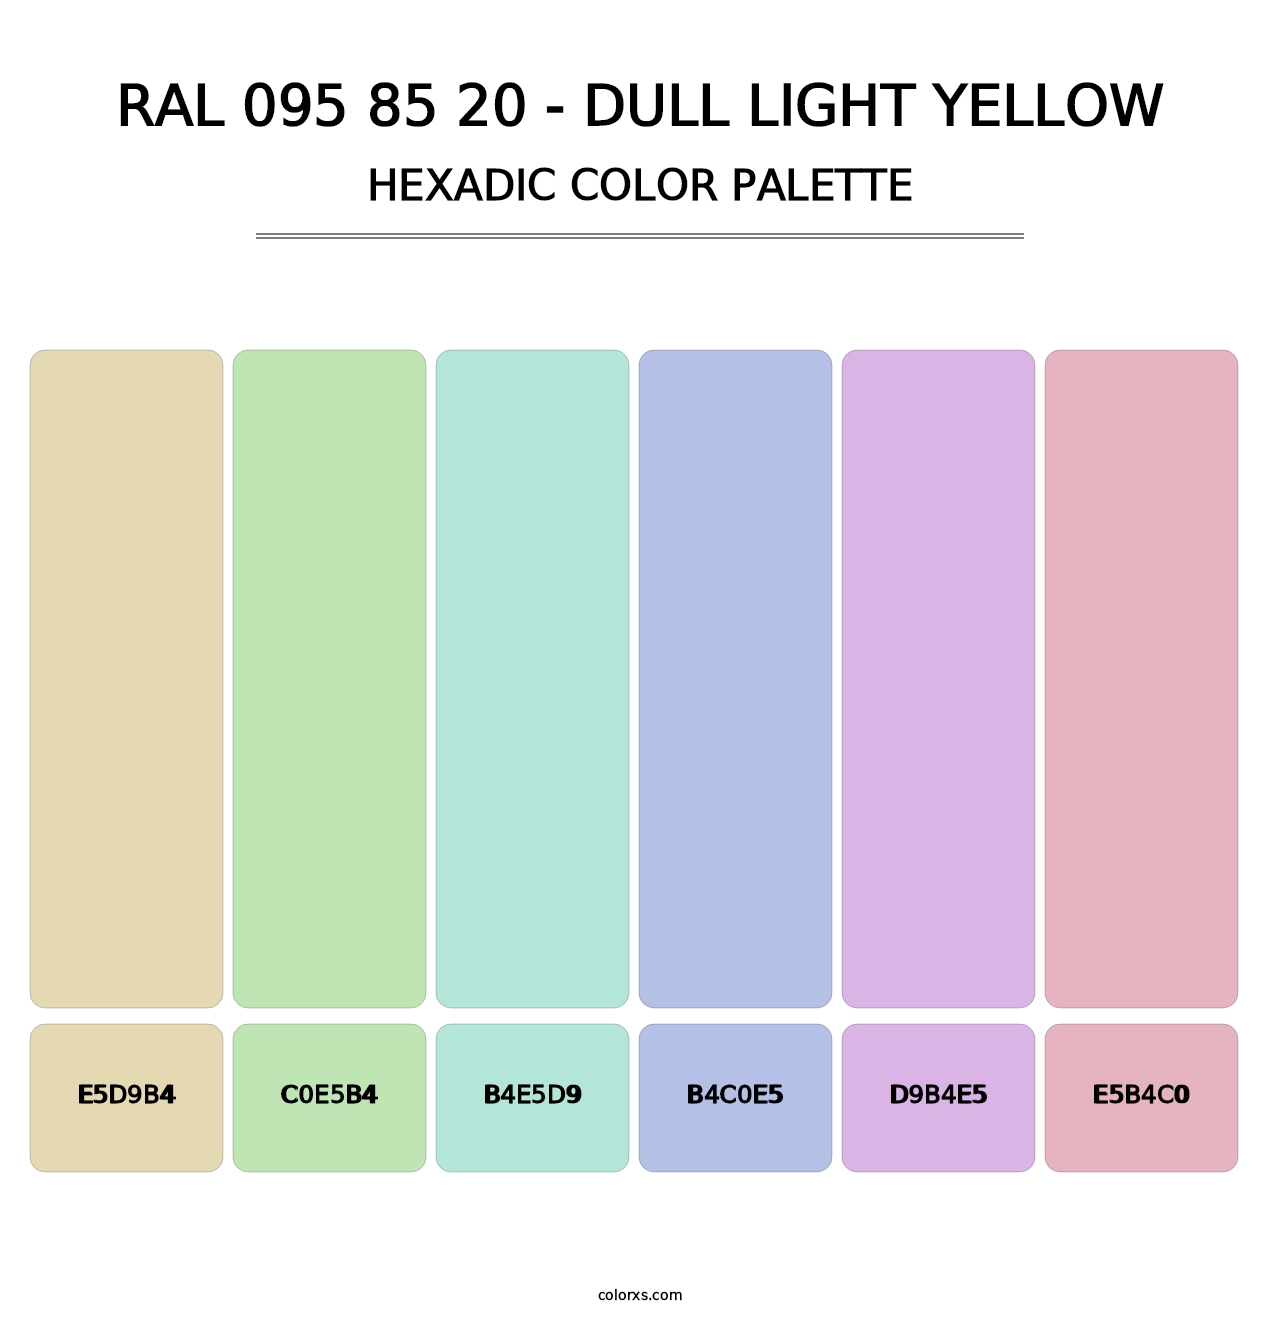 RAL 095 85 20 - Dull Light Yellow - Hexadic Color Palette